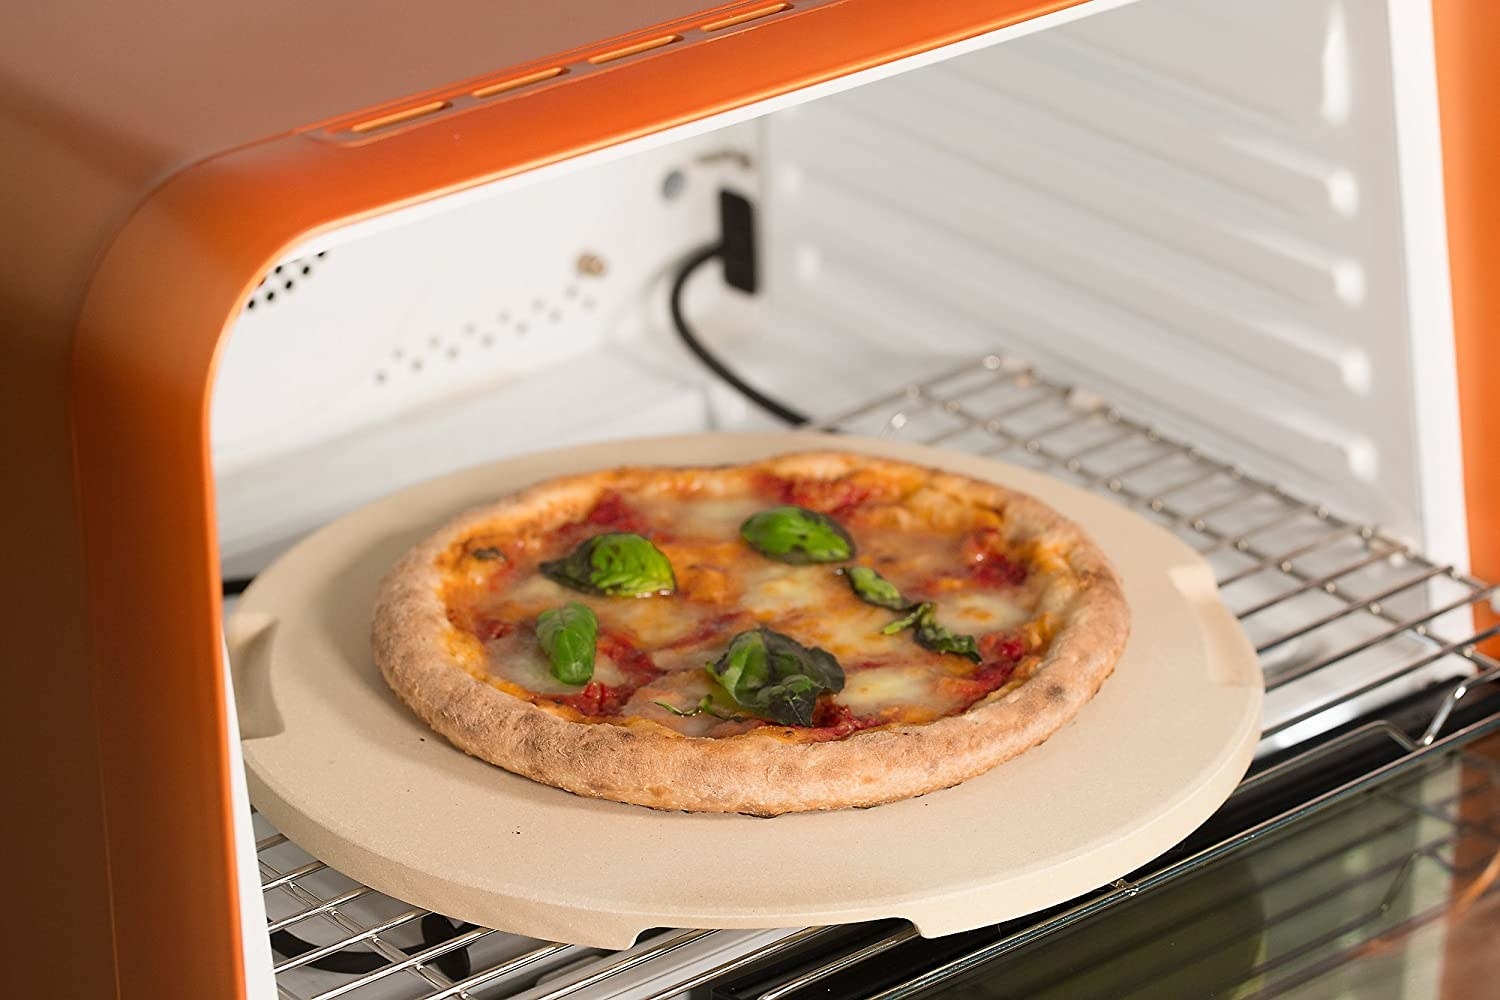 A pizza stone with a pizza on it in an oven